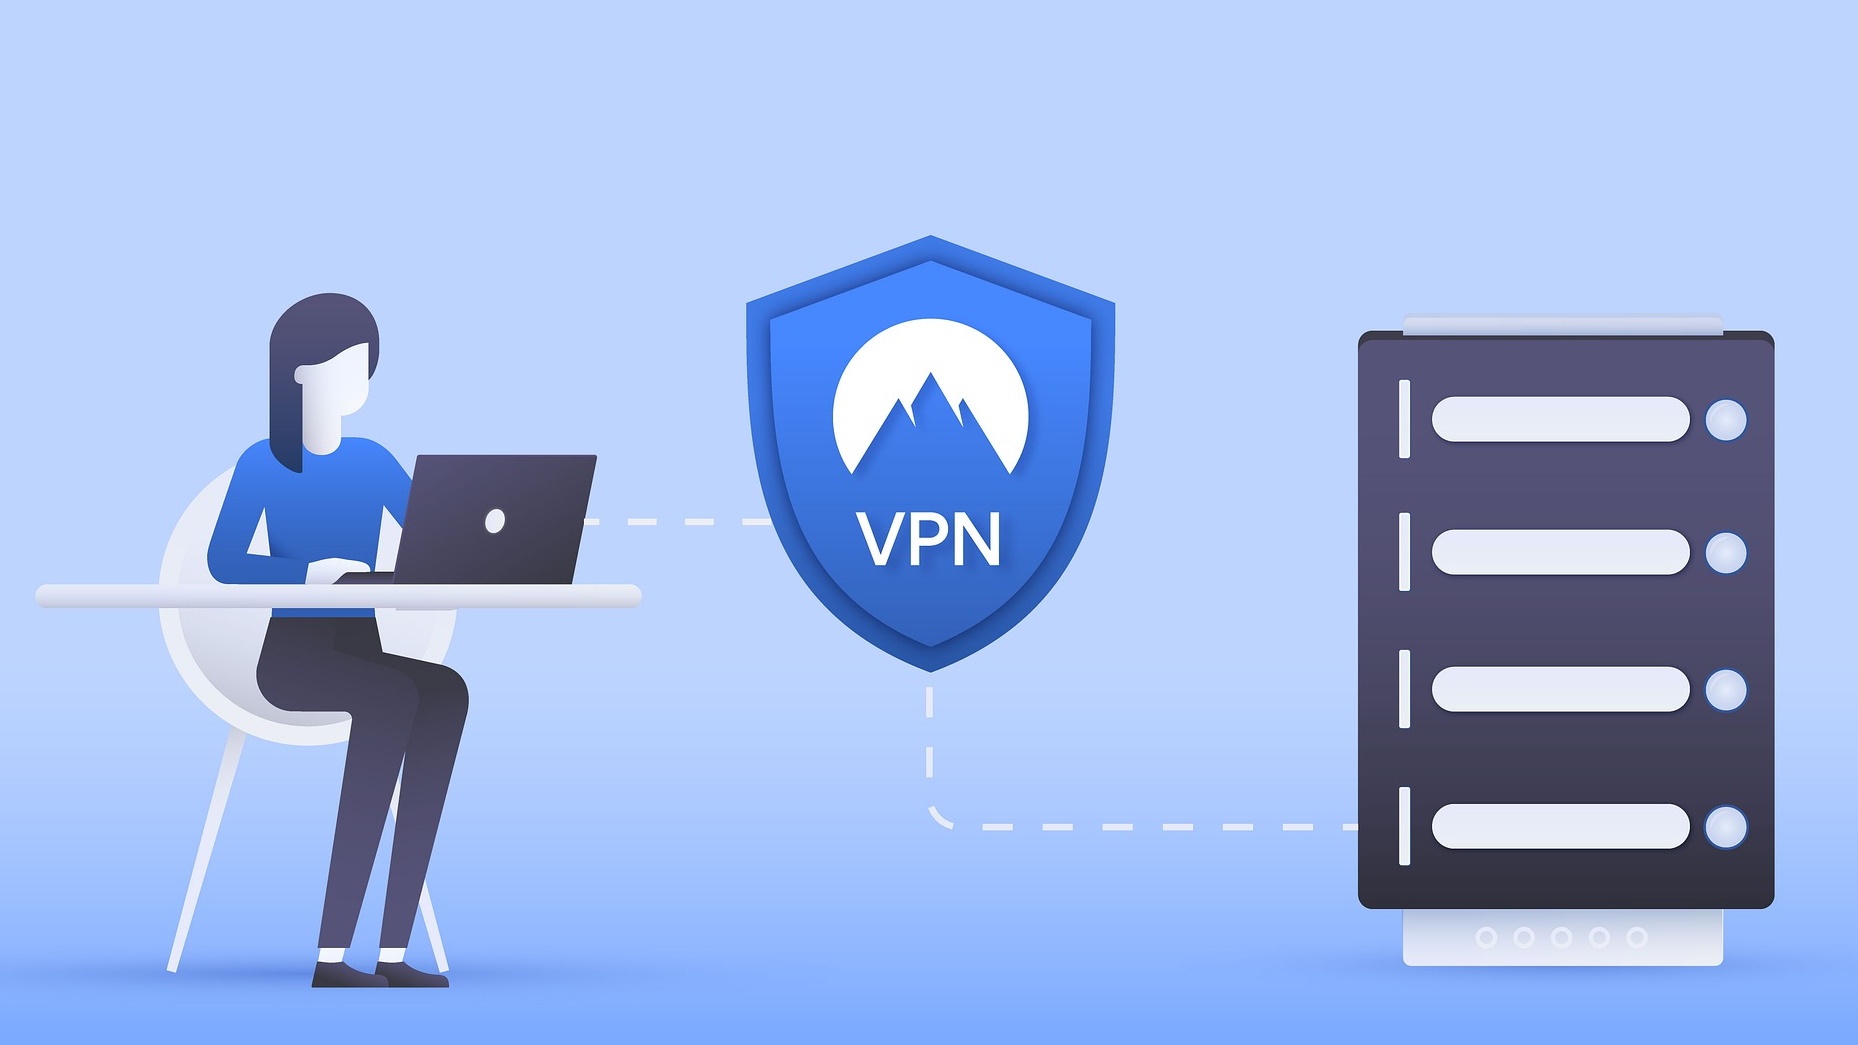 how to set up vpn on home network